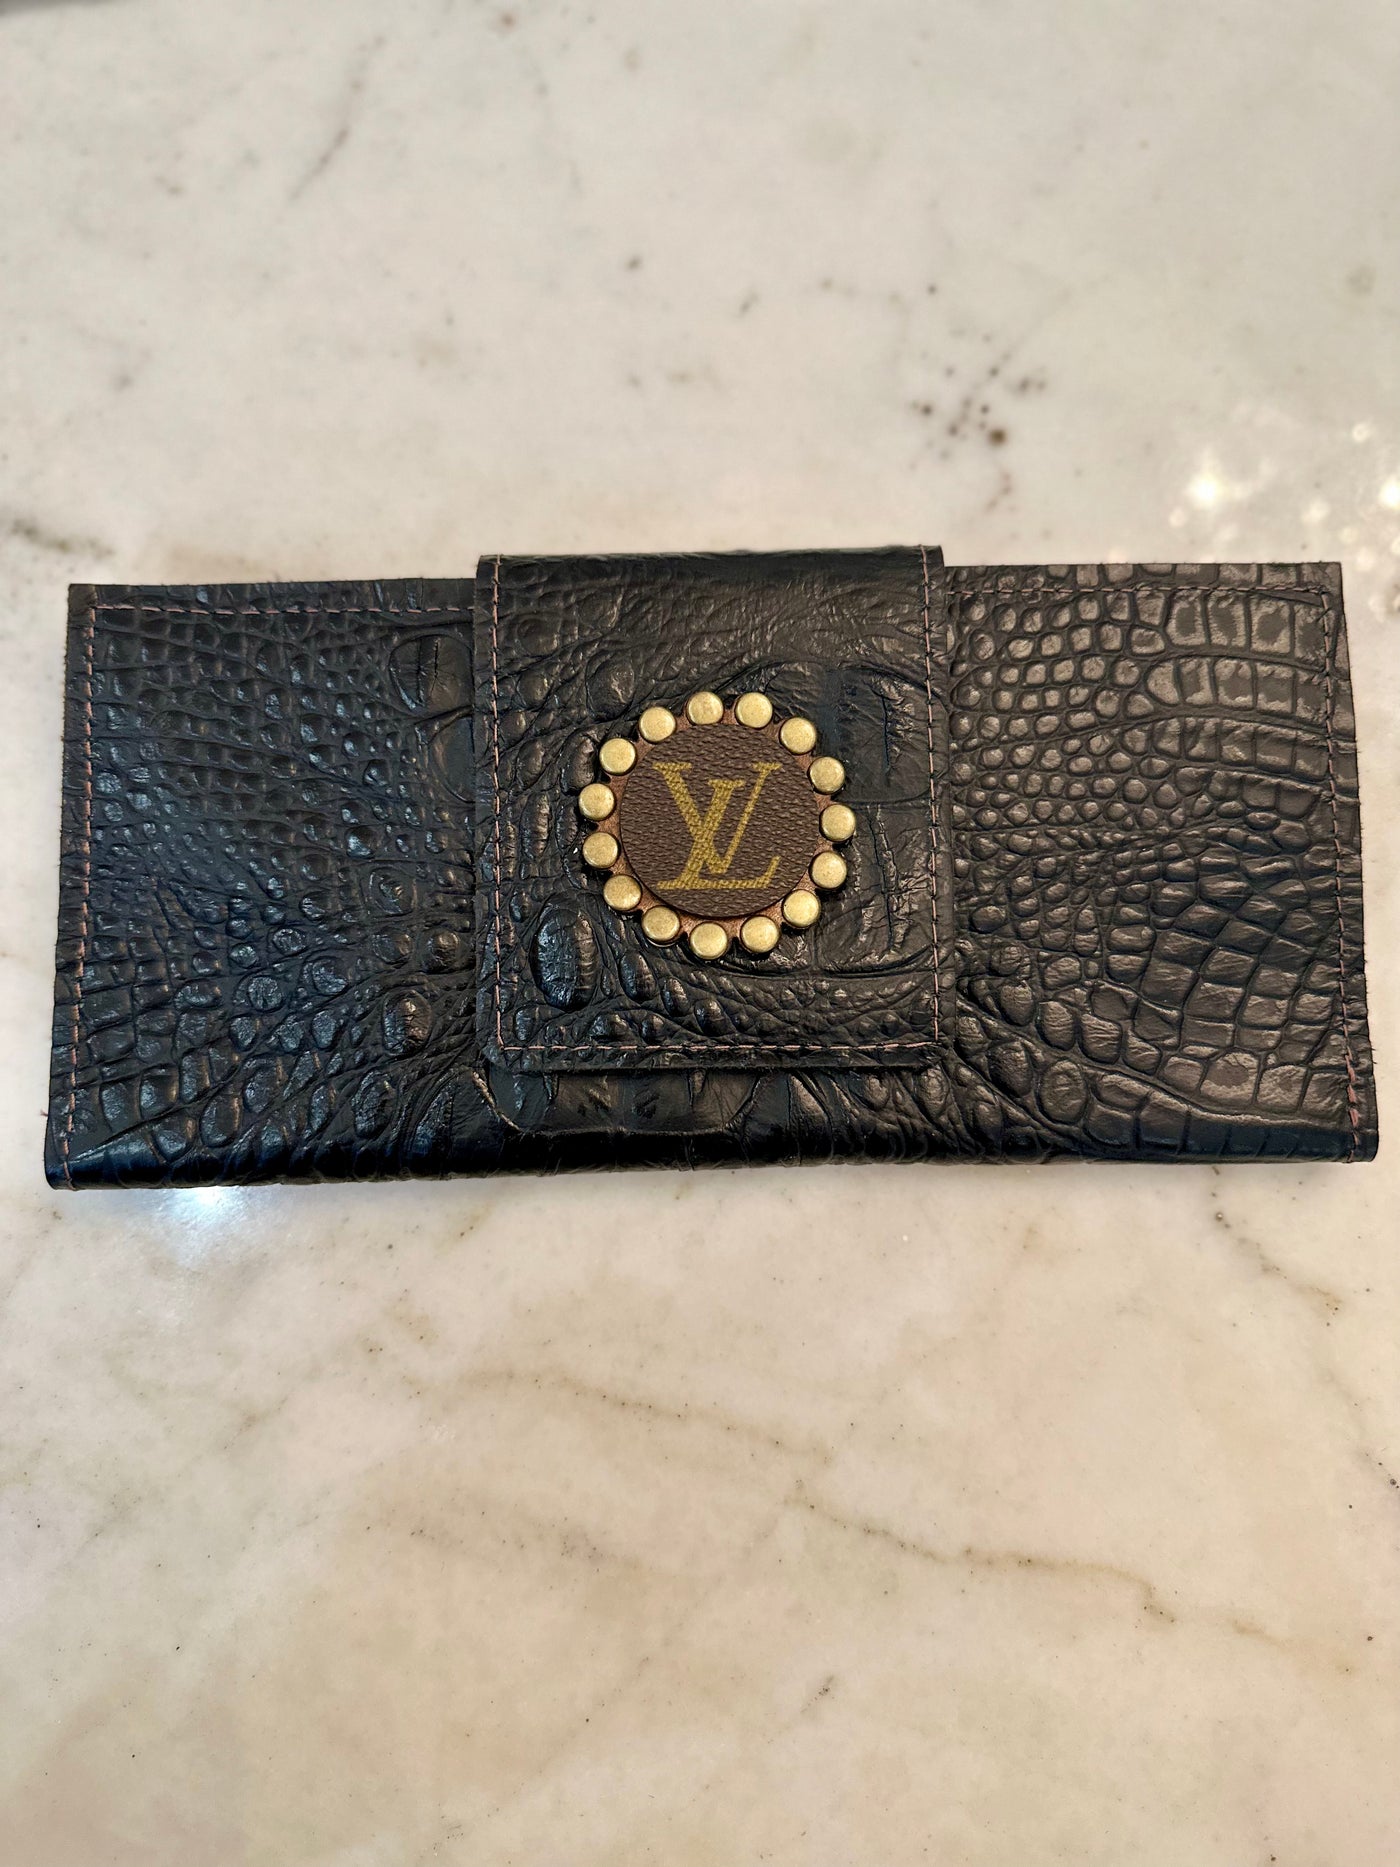 Sheri Upcycled Clutch/Wallet